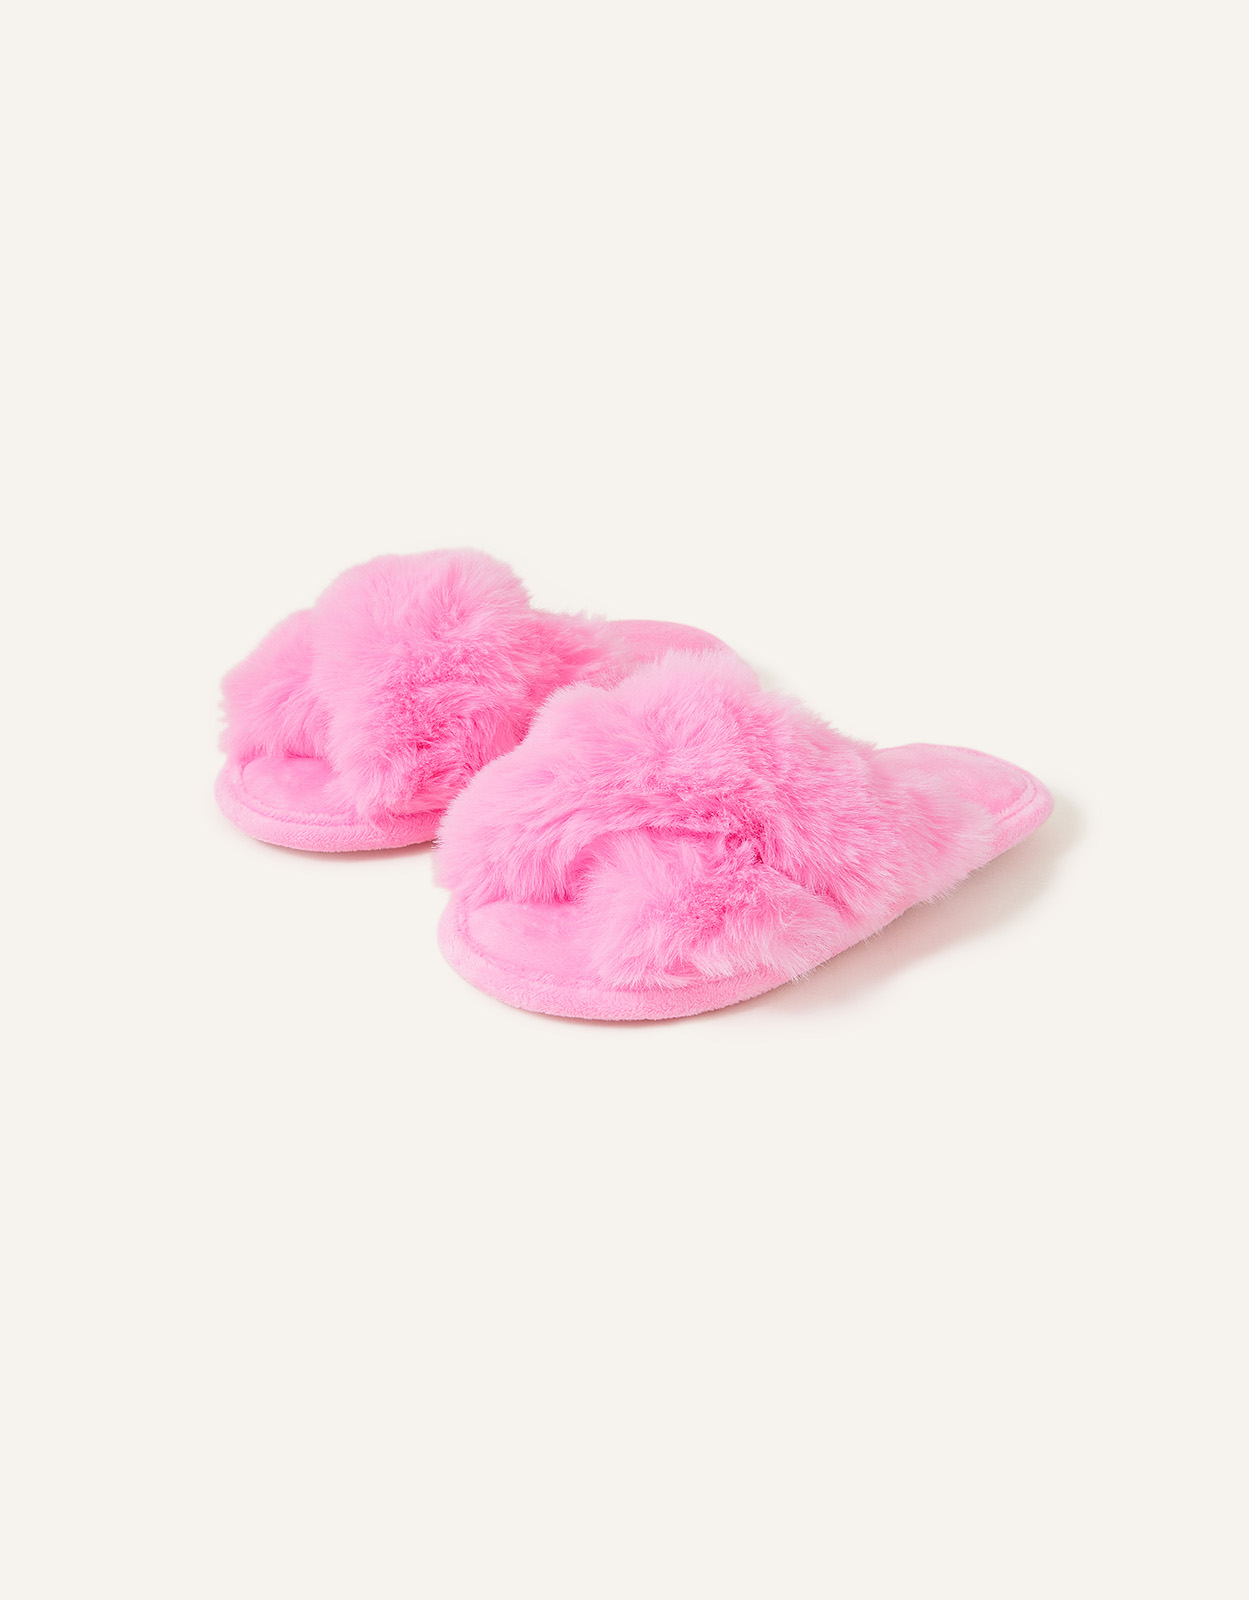 Accessorize Girl's Girls Faux Fur Sliders Pink, Size: 7-8